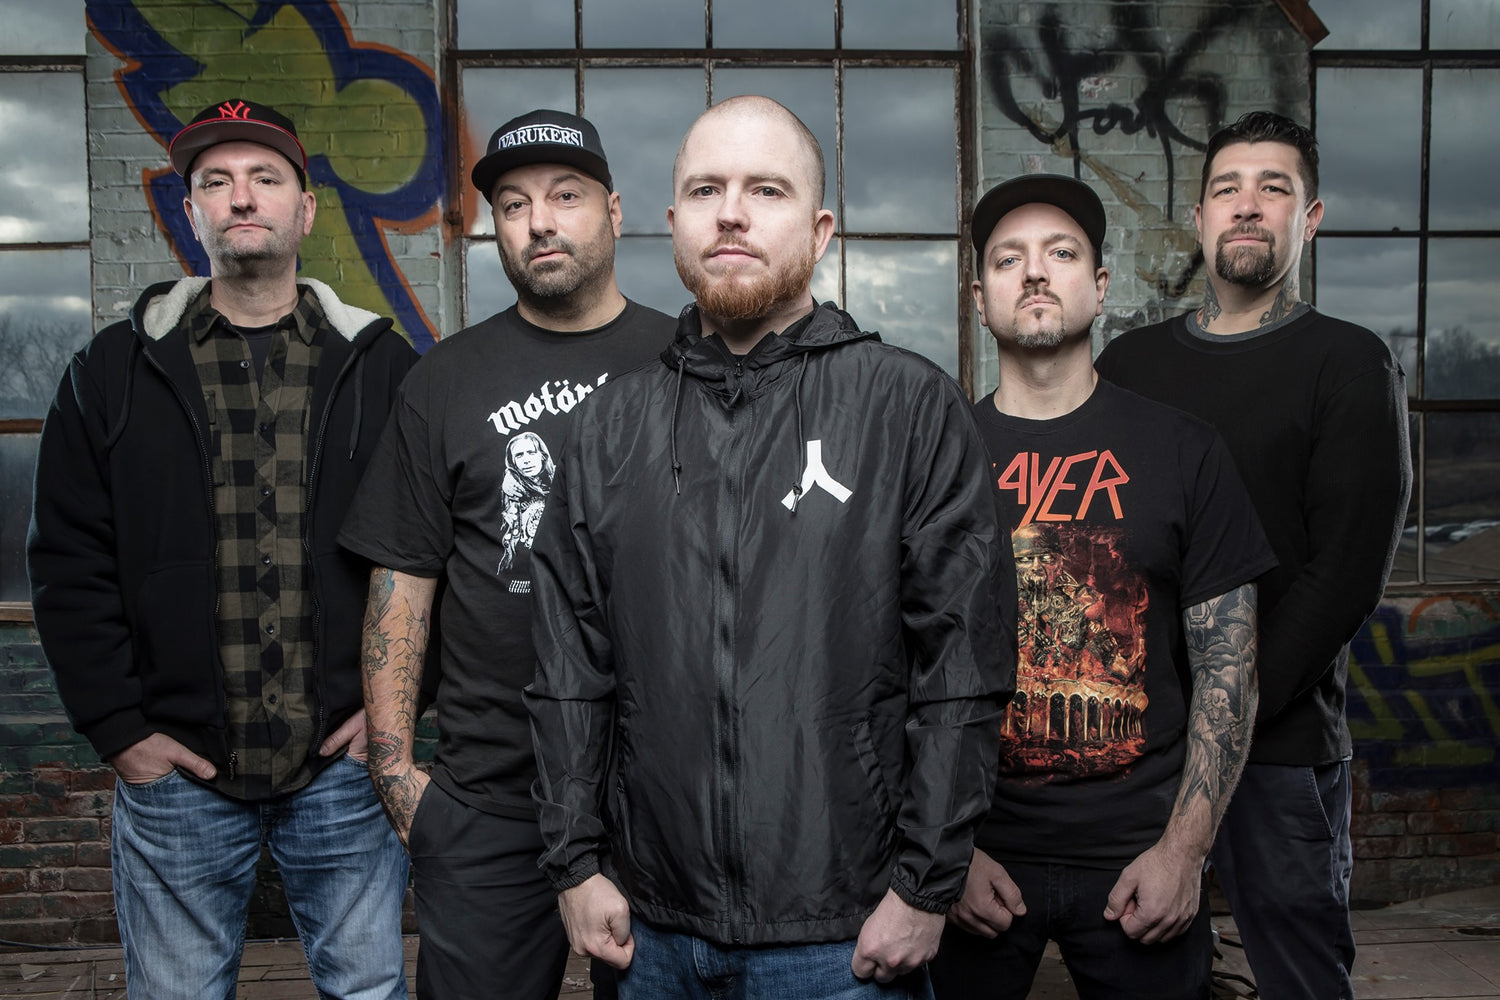 Hatebreed's philosophy of positivity sees the light of day